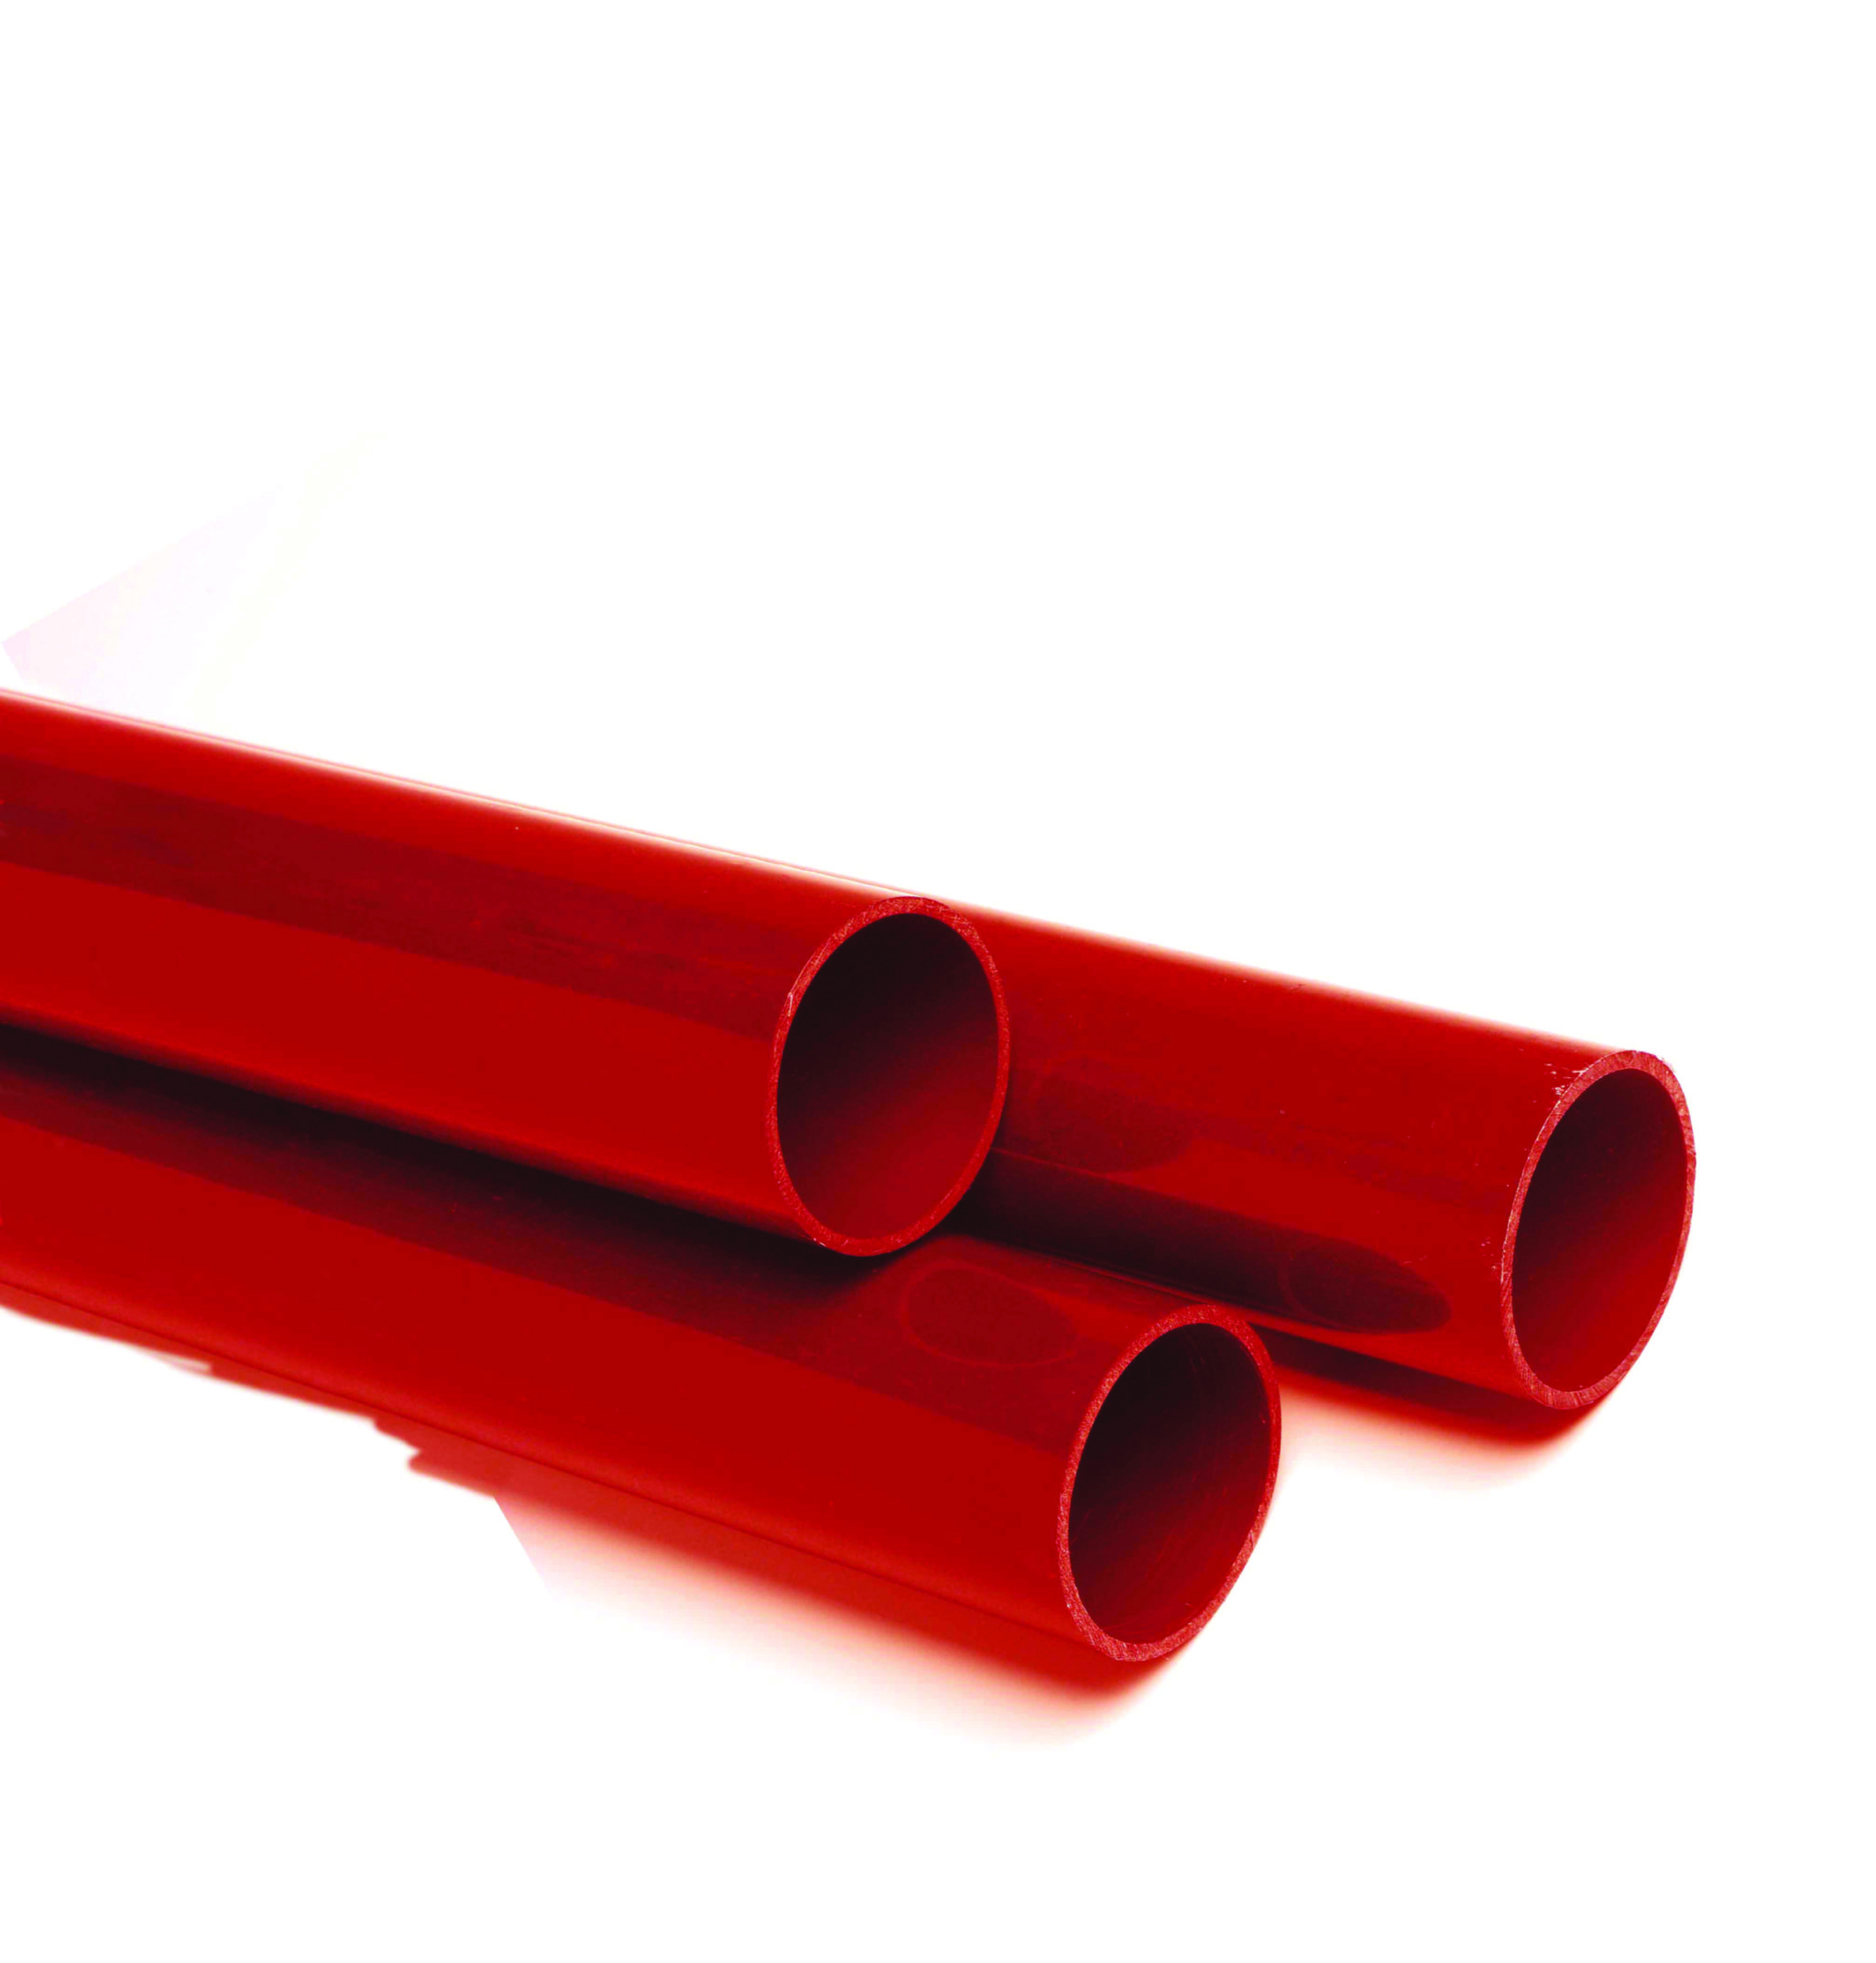 RED ABS pipe - EFFAST - 100% Made in Italy